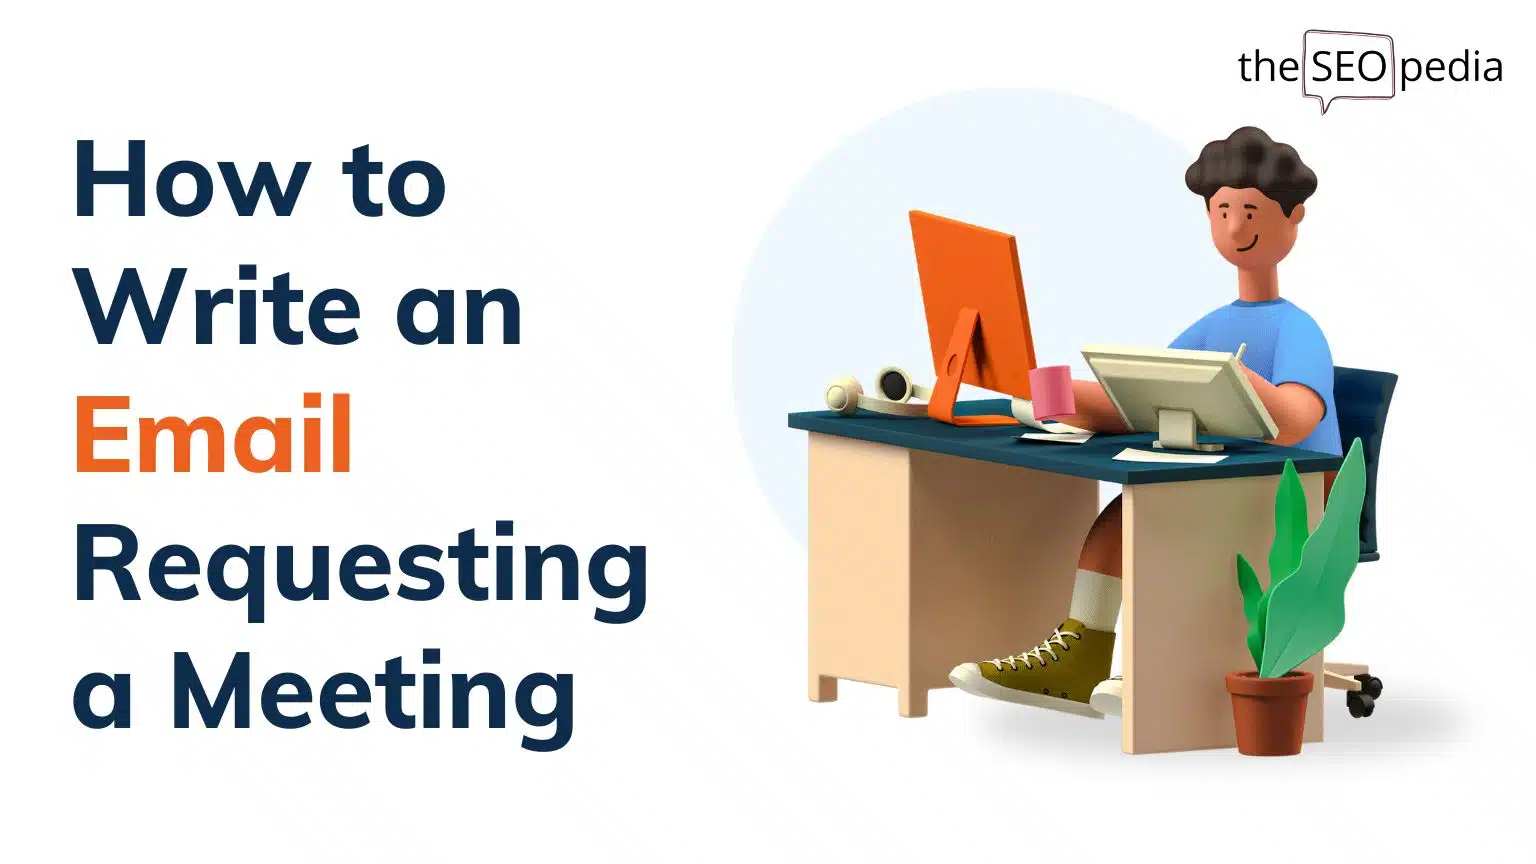 How to Write an Email Requesting a Meeting